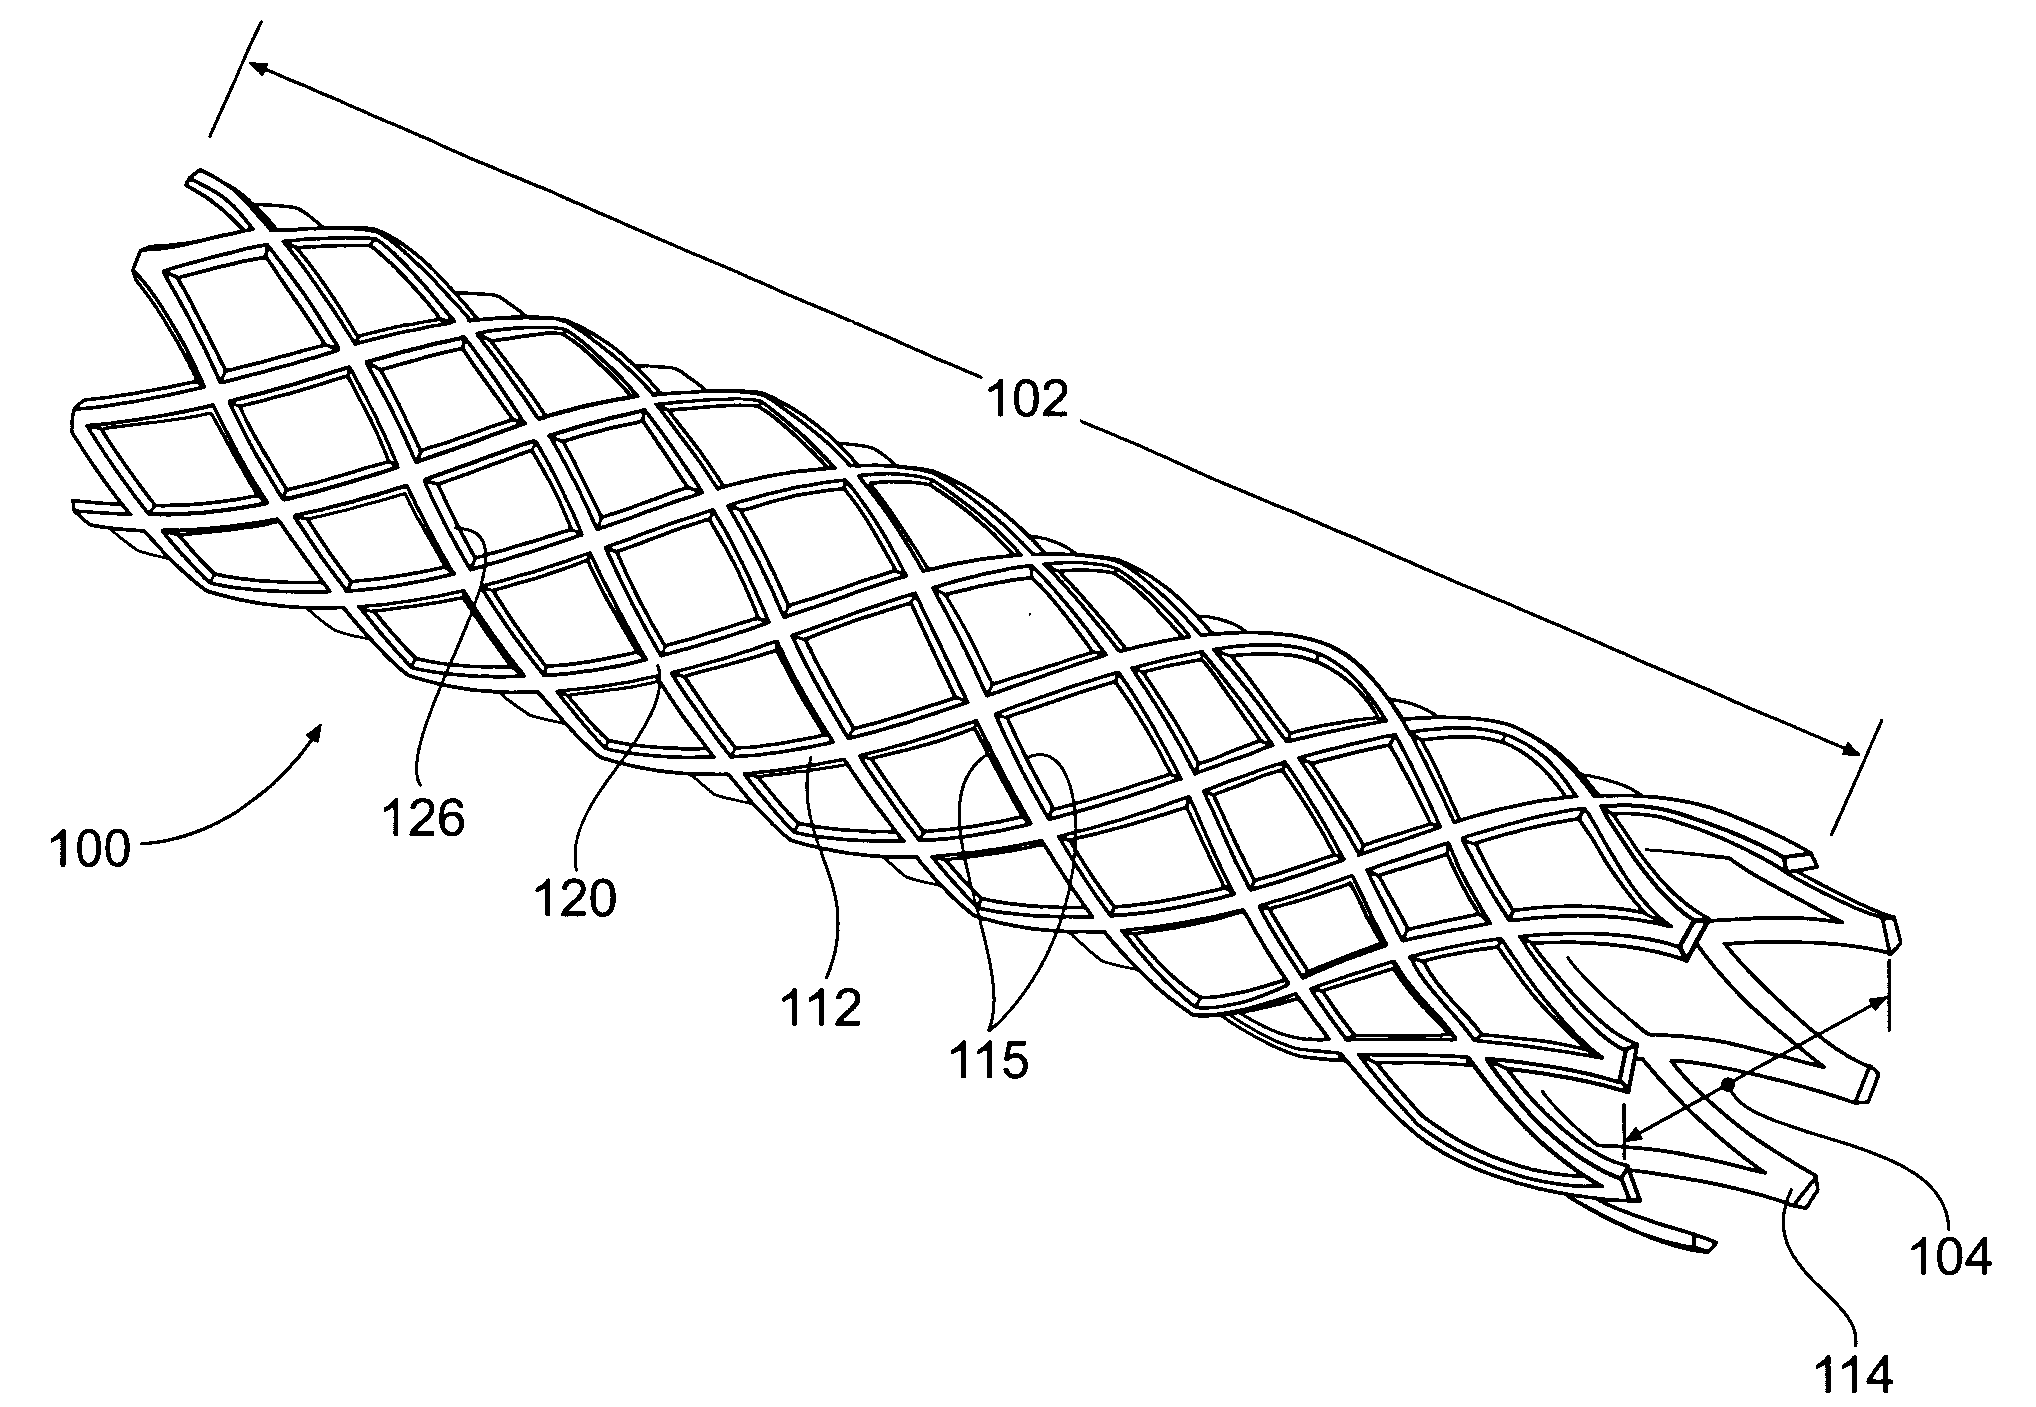 Apparatus and method for minimizing flow disturbances in a stented region of a lumen